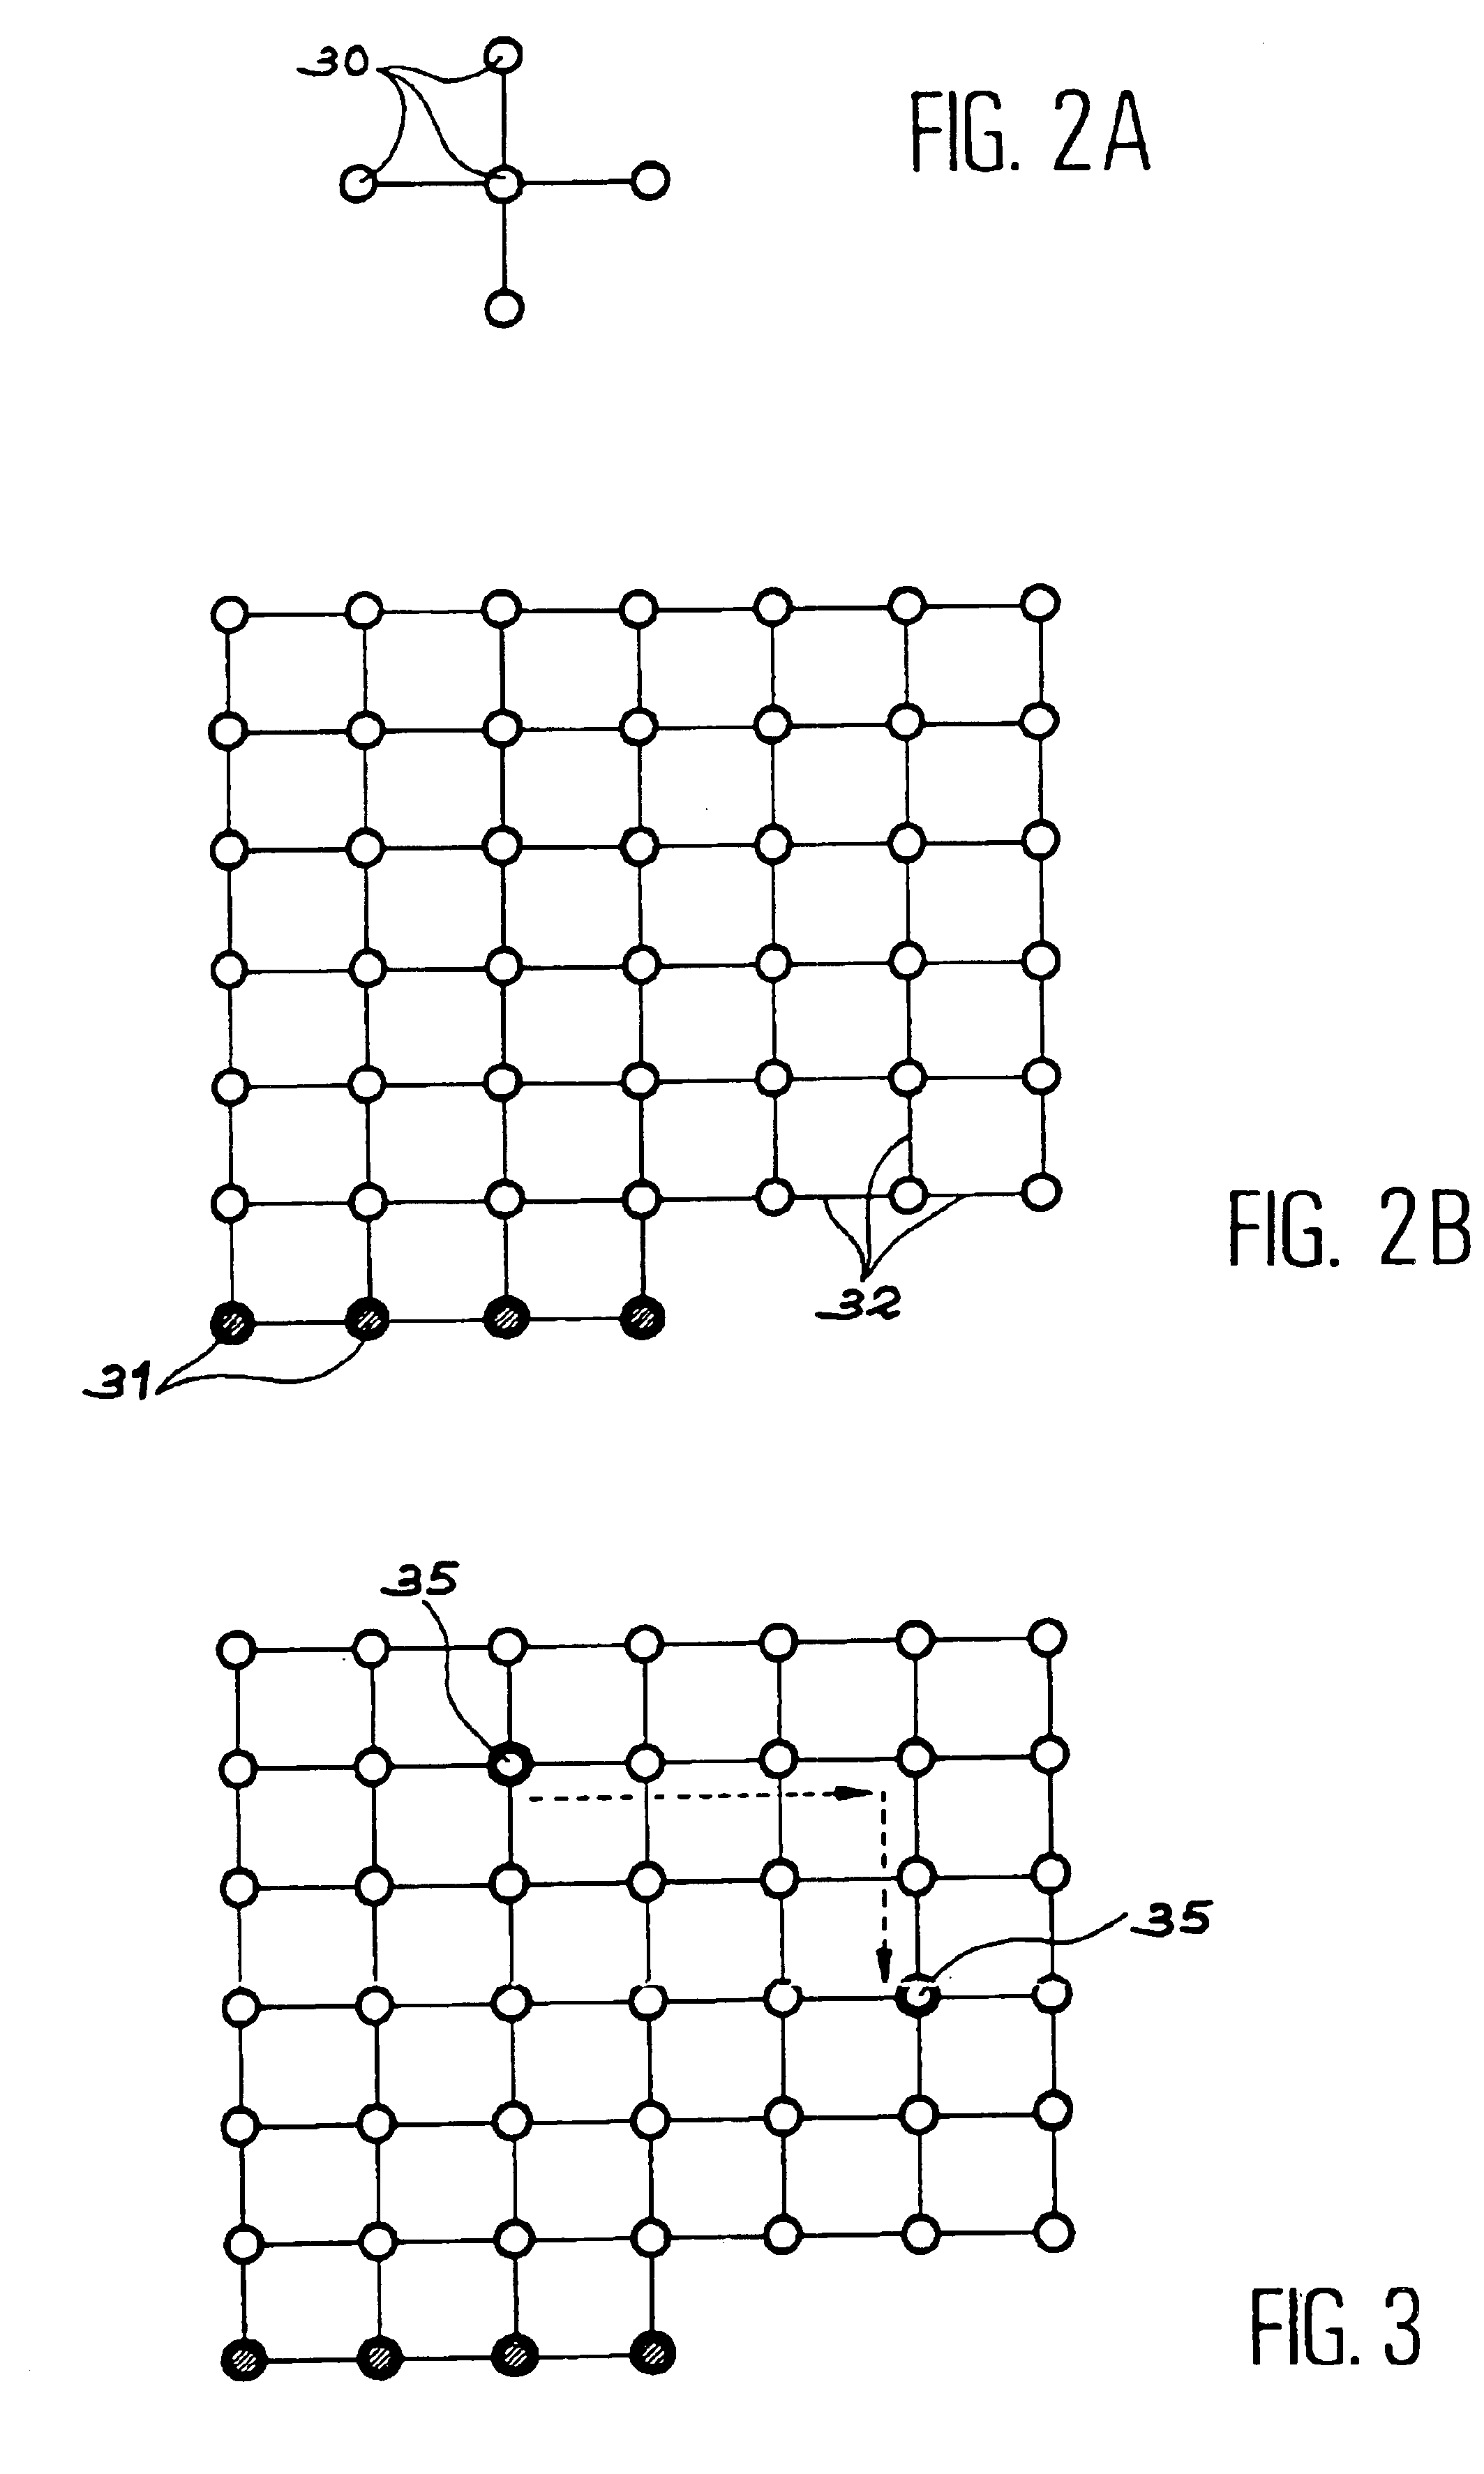 Reconfiguration method applicable to an array of identical functional elements